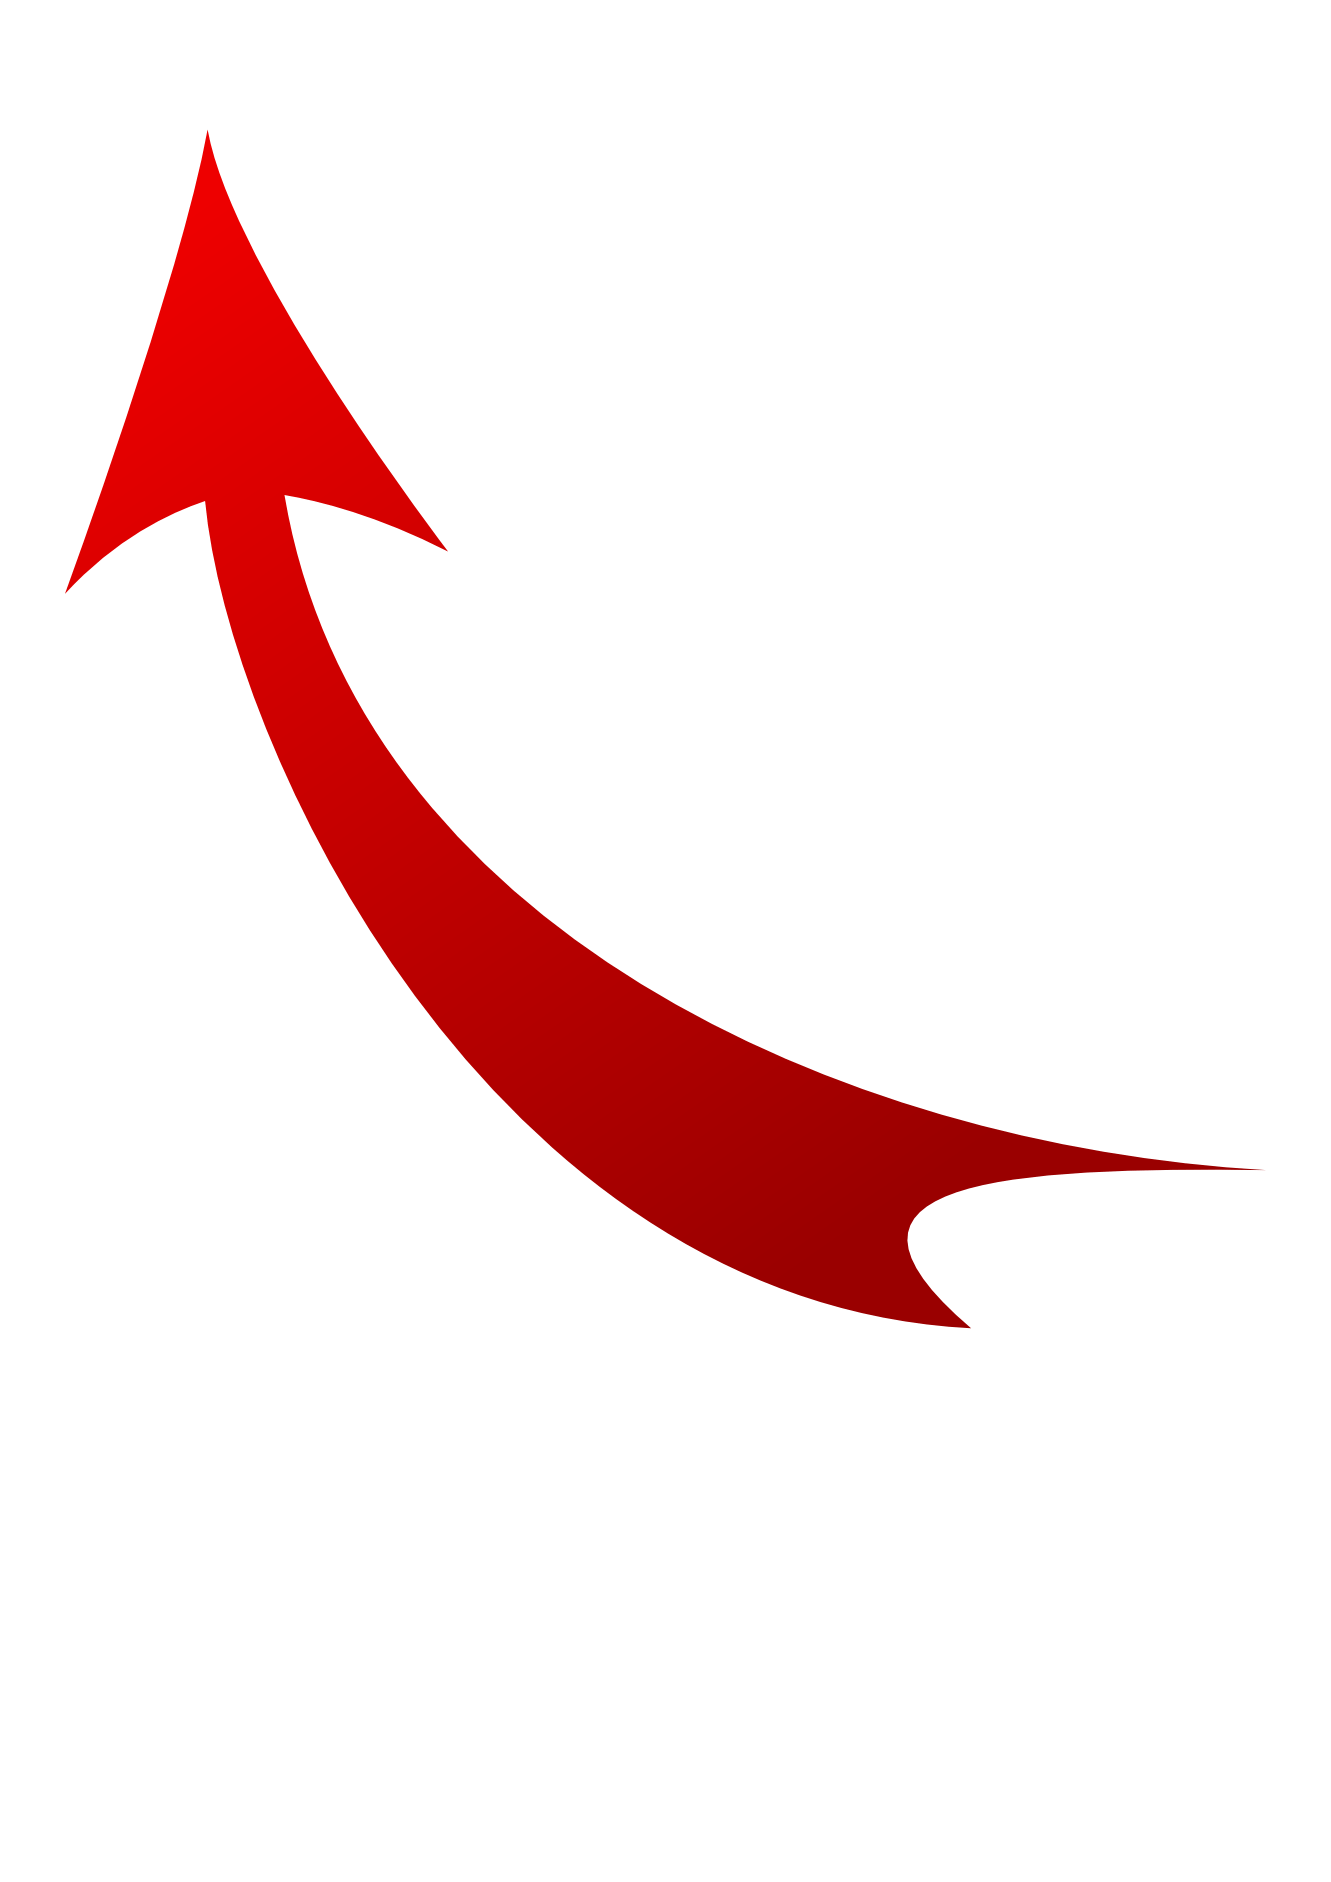 Diagonal Red Arrow Logo - Download Free Red Arrow PNG Images - Free Icons and PNG Backgrounds